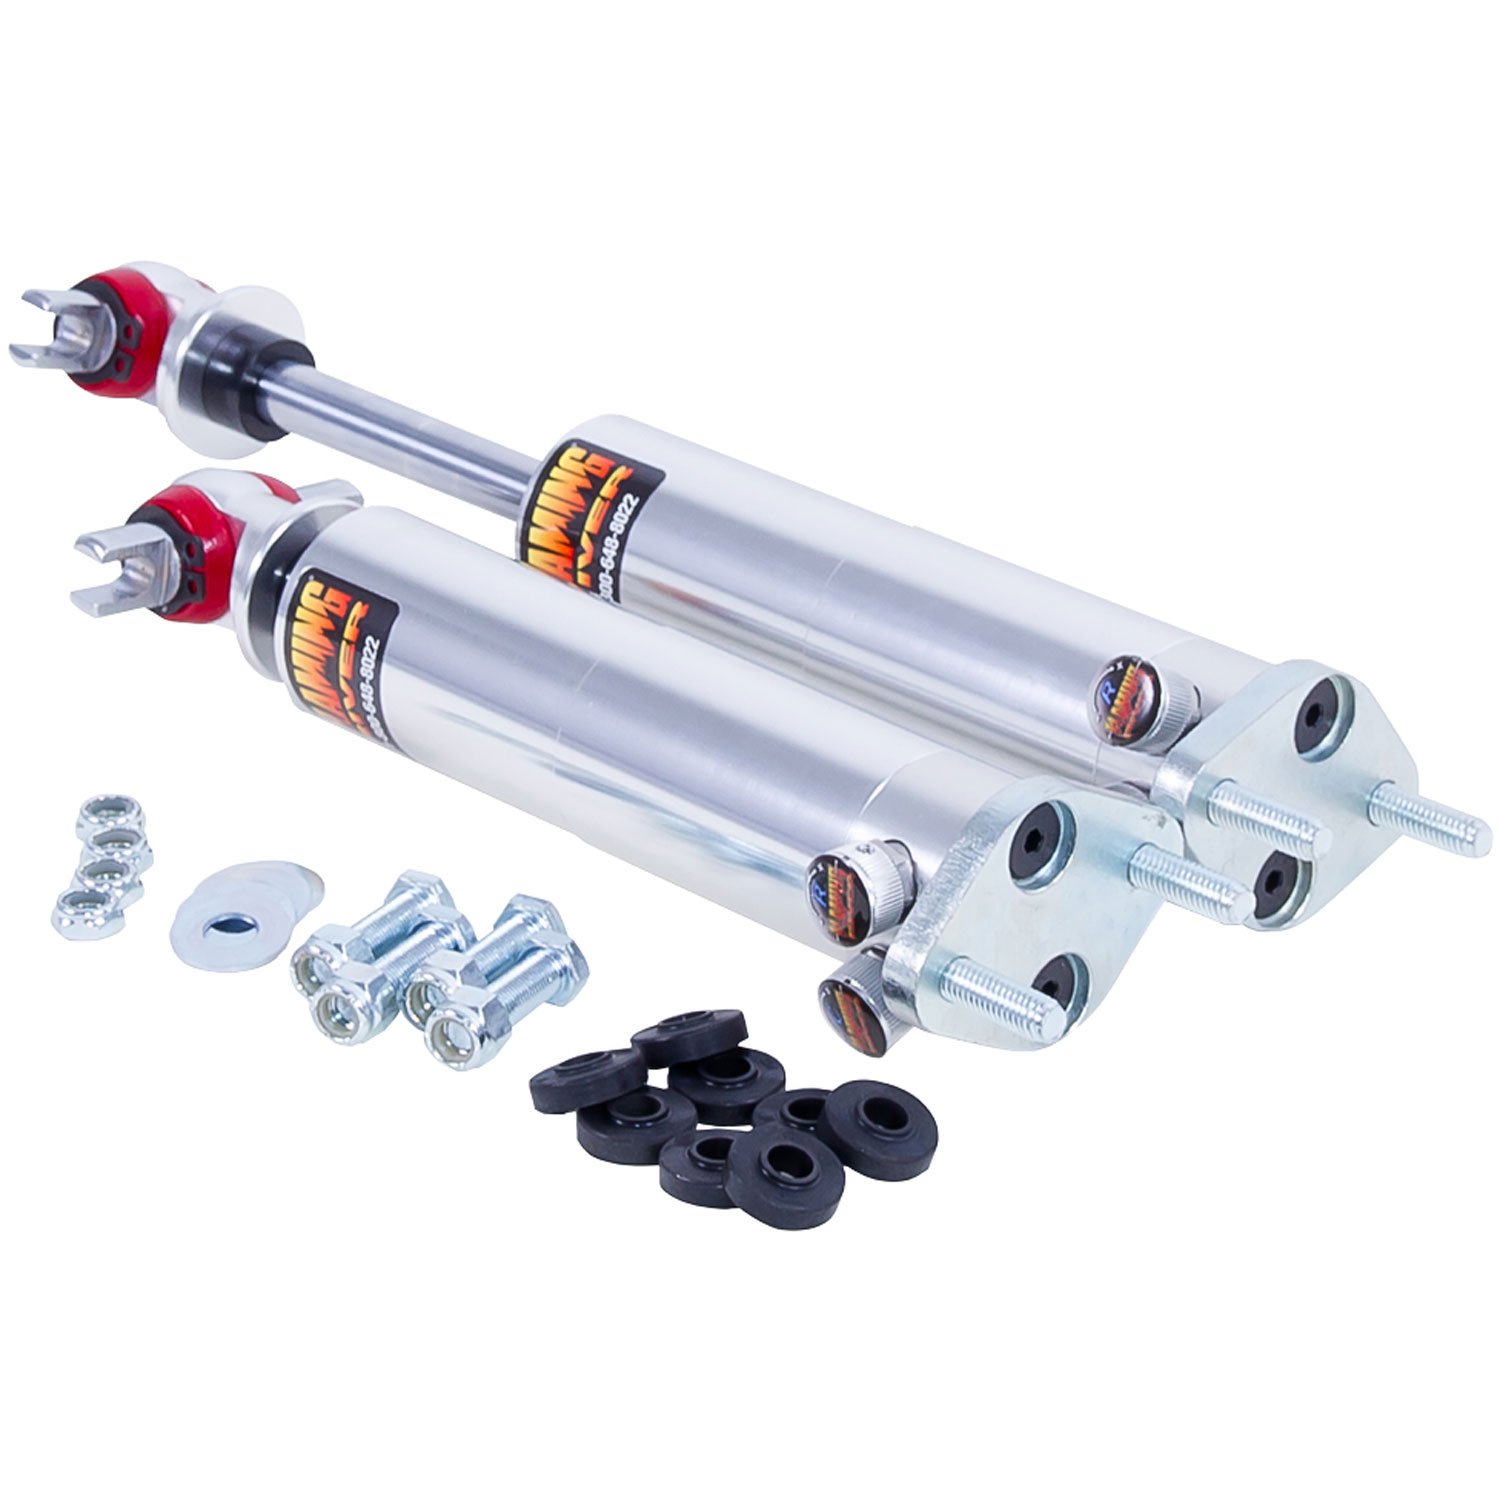 MUSTANG FRONT SMOOTH D-ADJ SHOCK KIT (2 INCLUDED)